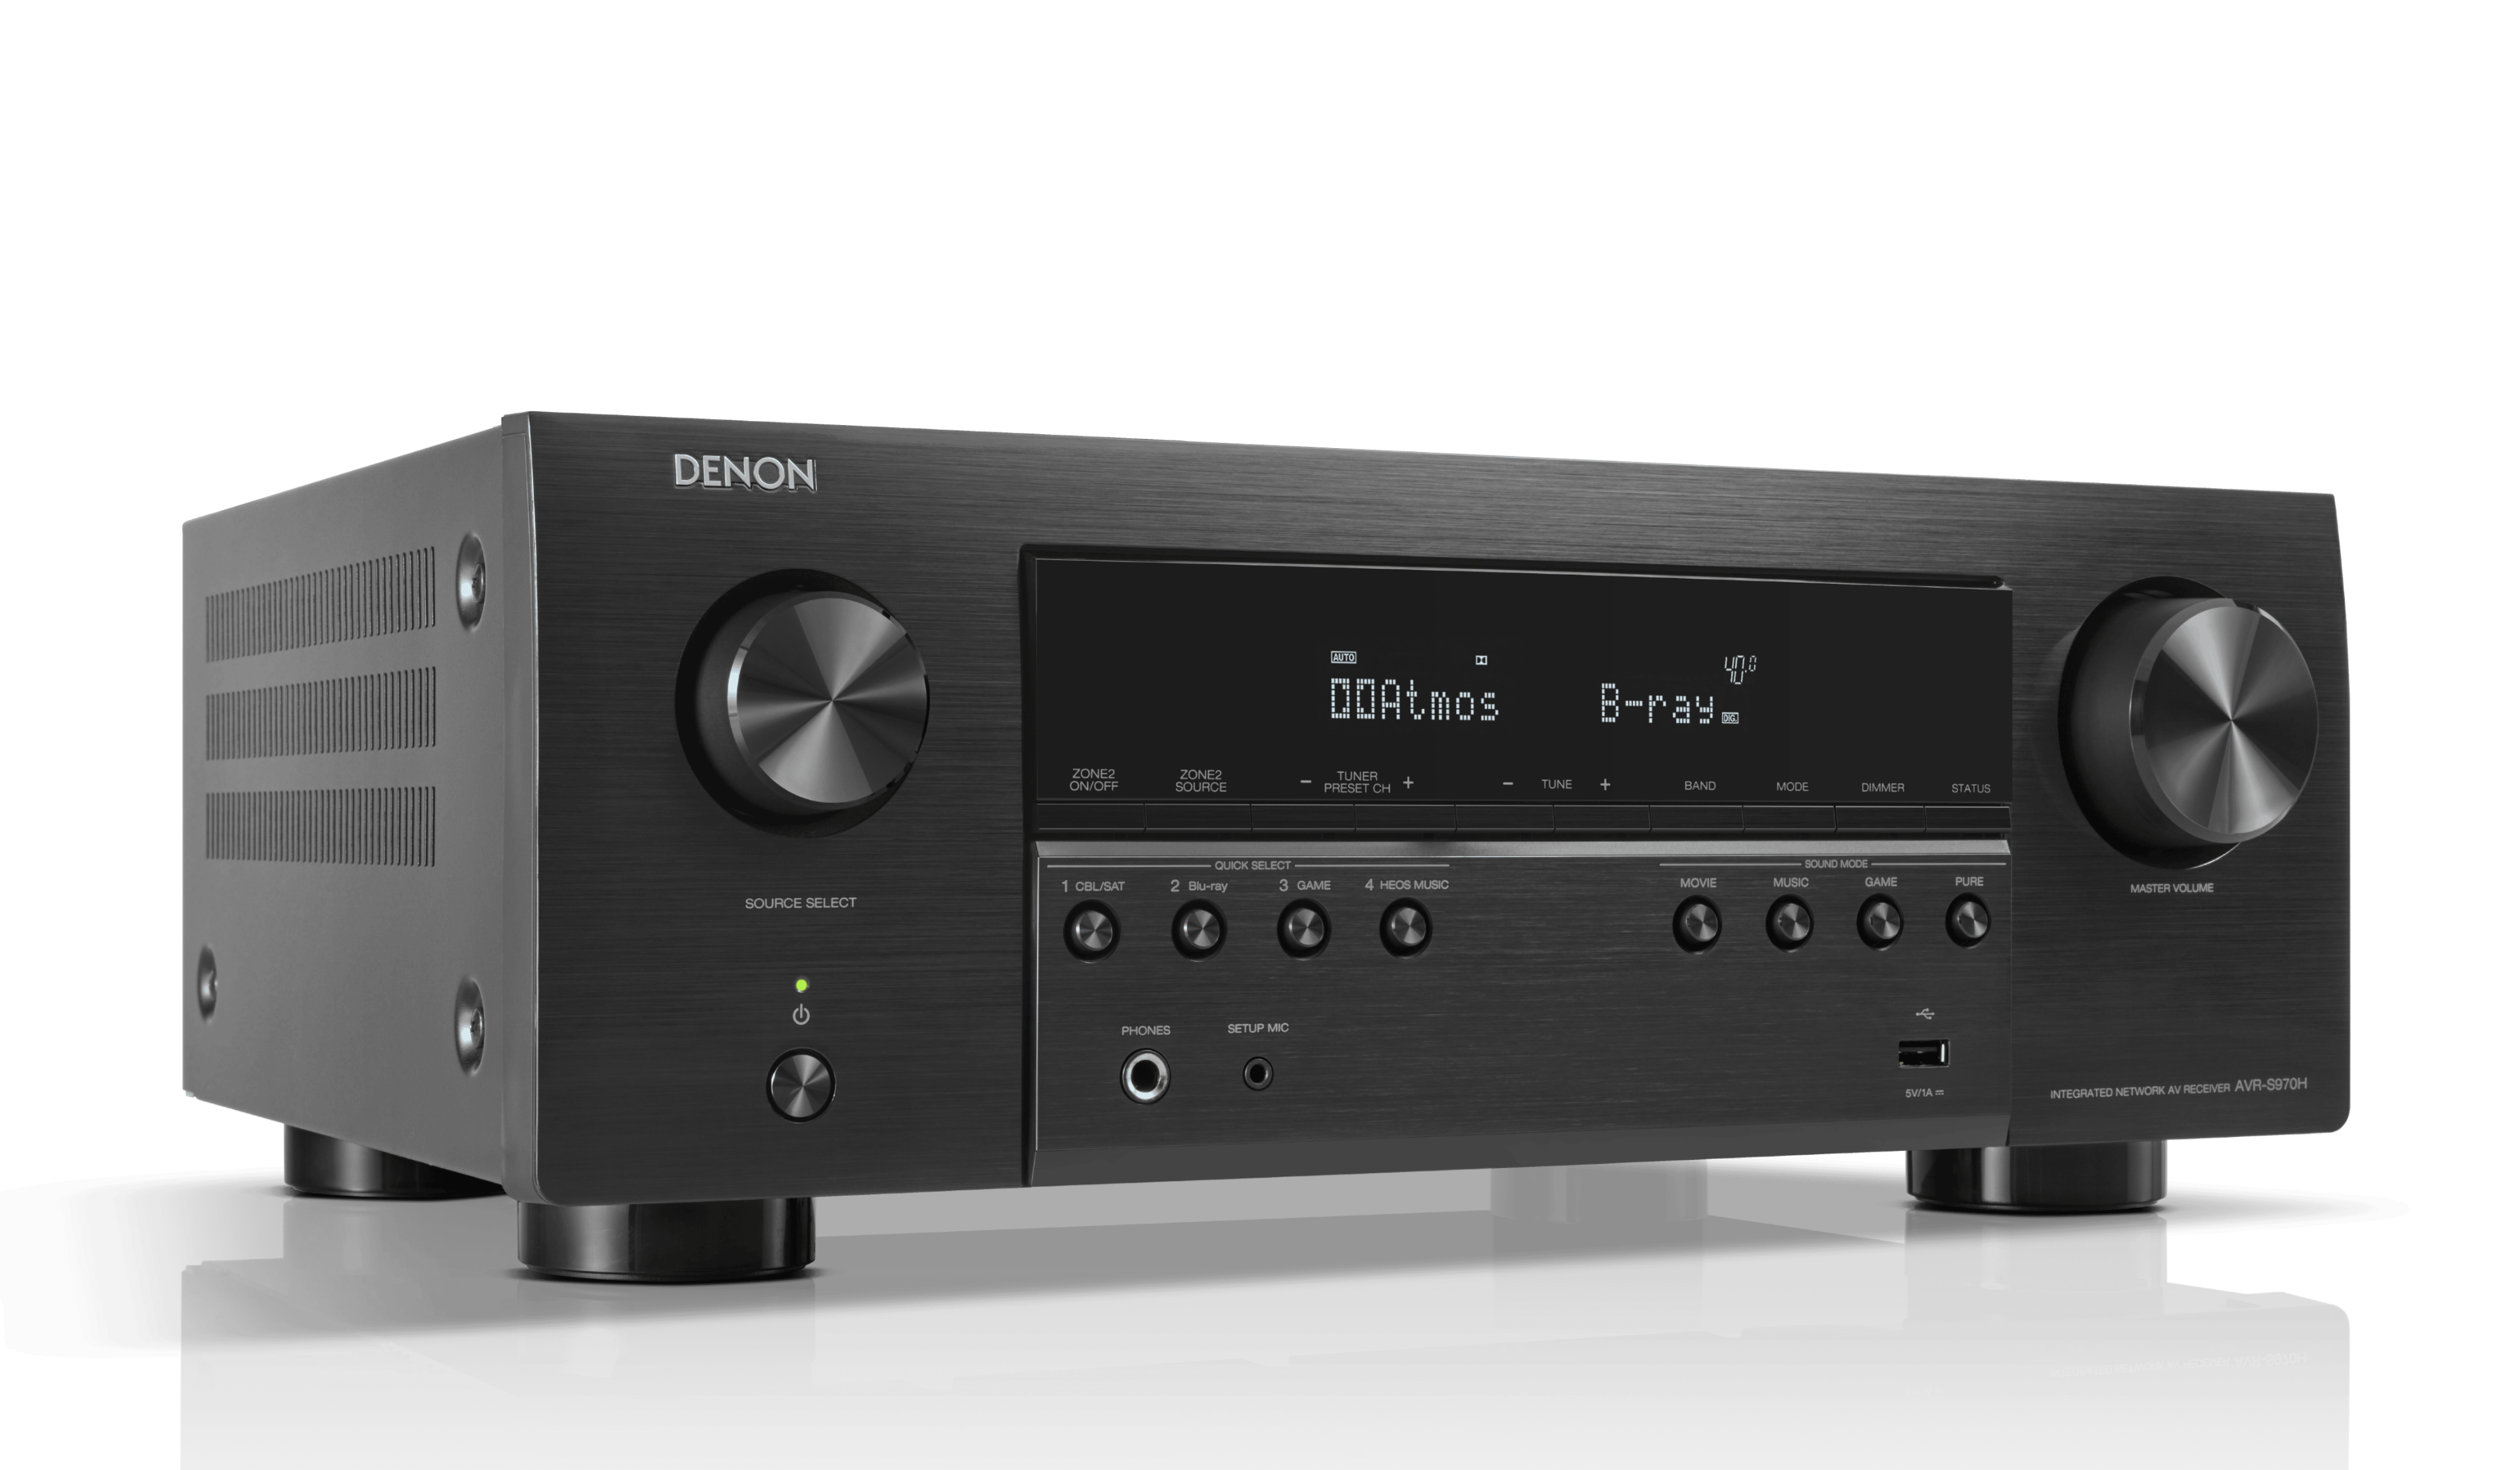 and 8K video | Denon 7.2 - channel from experience audio a 3D US receiver - AVR-S970H